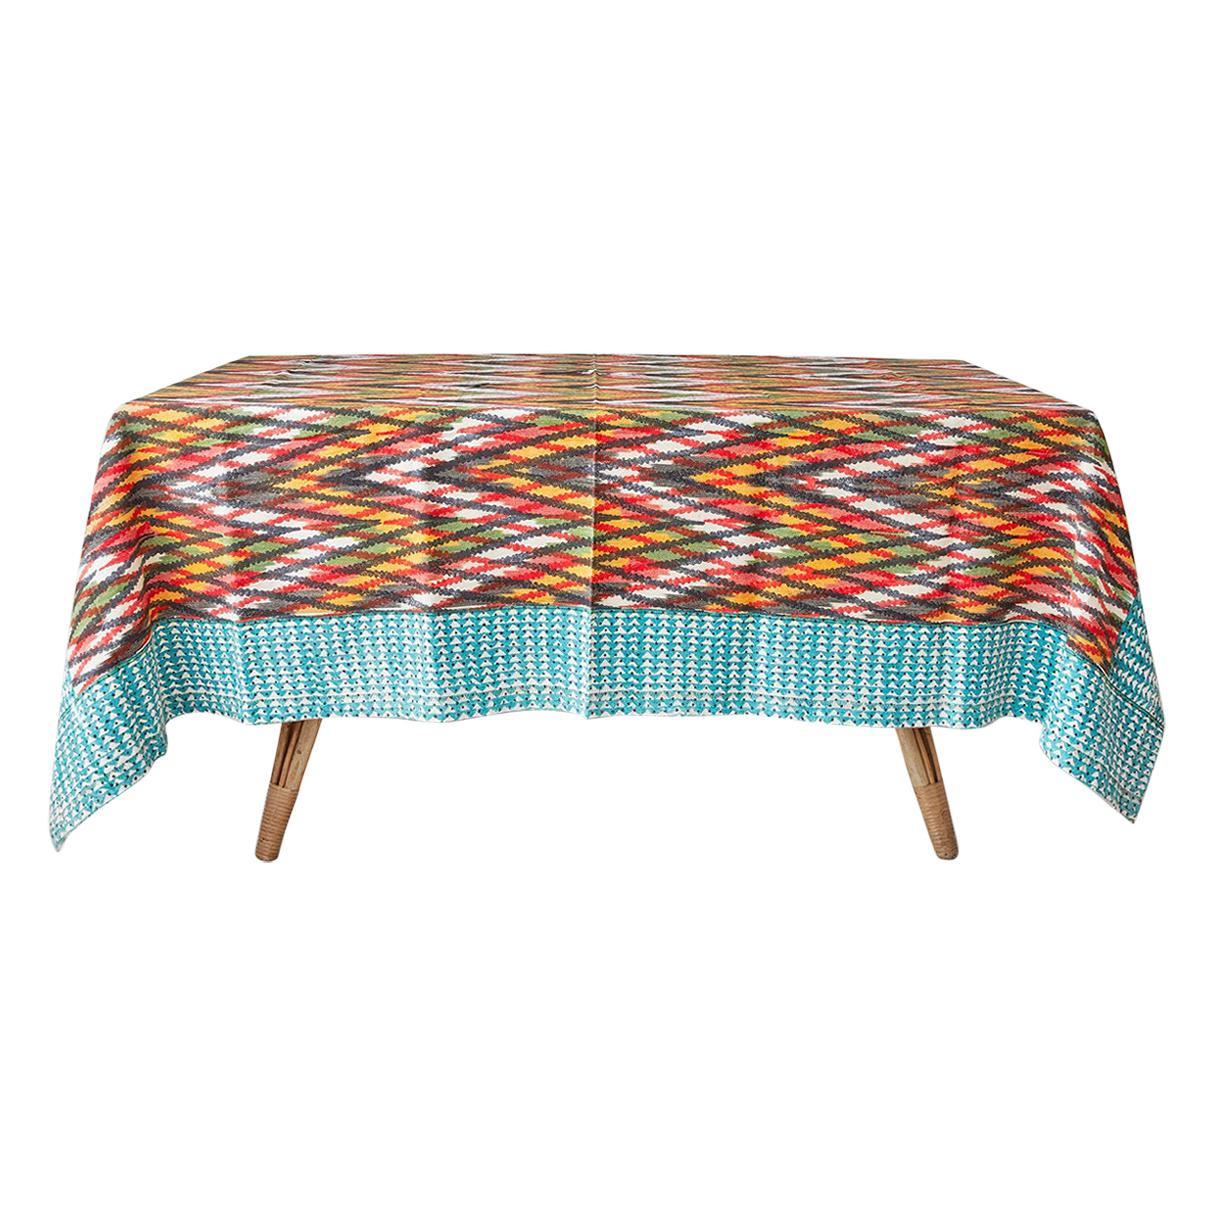 Contemporary Gregory Parkinson Tablecloth with Multi Ikat Hand-Blocked Patterns